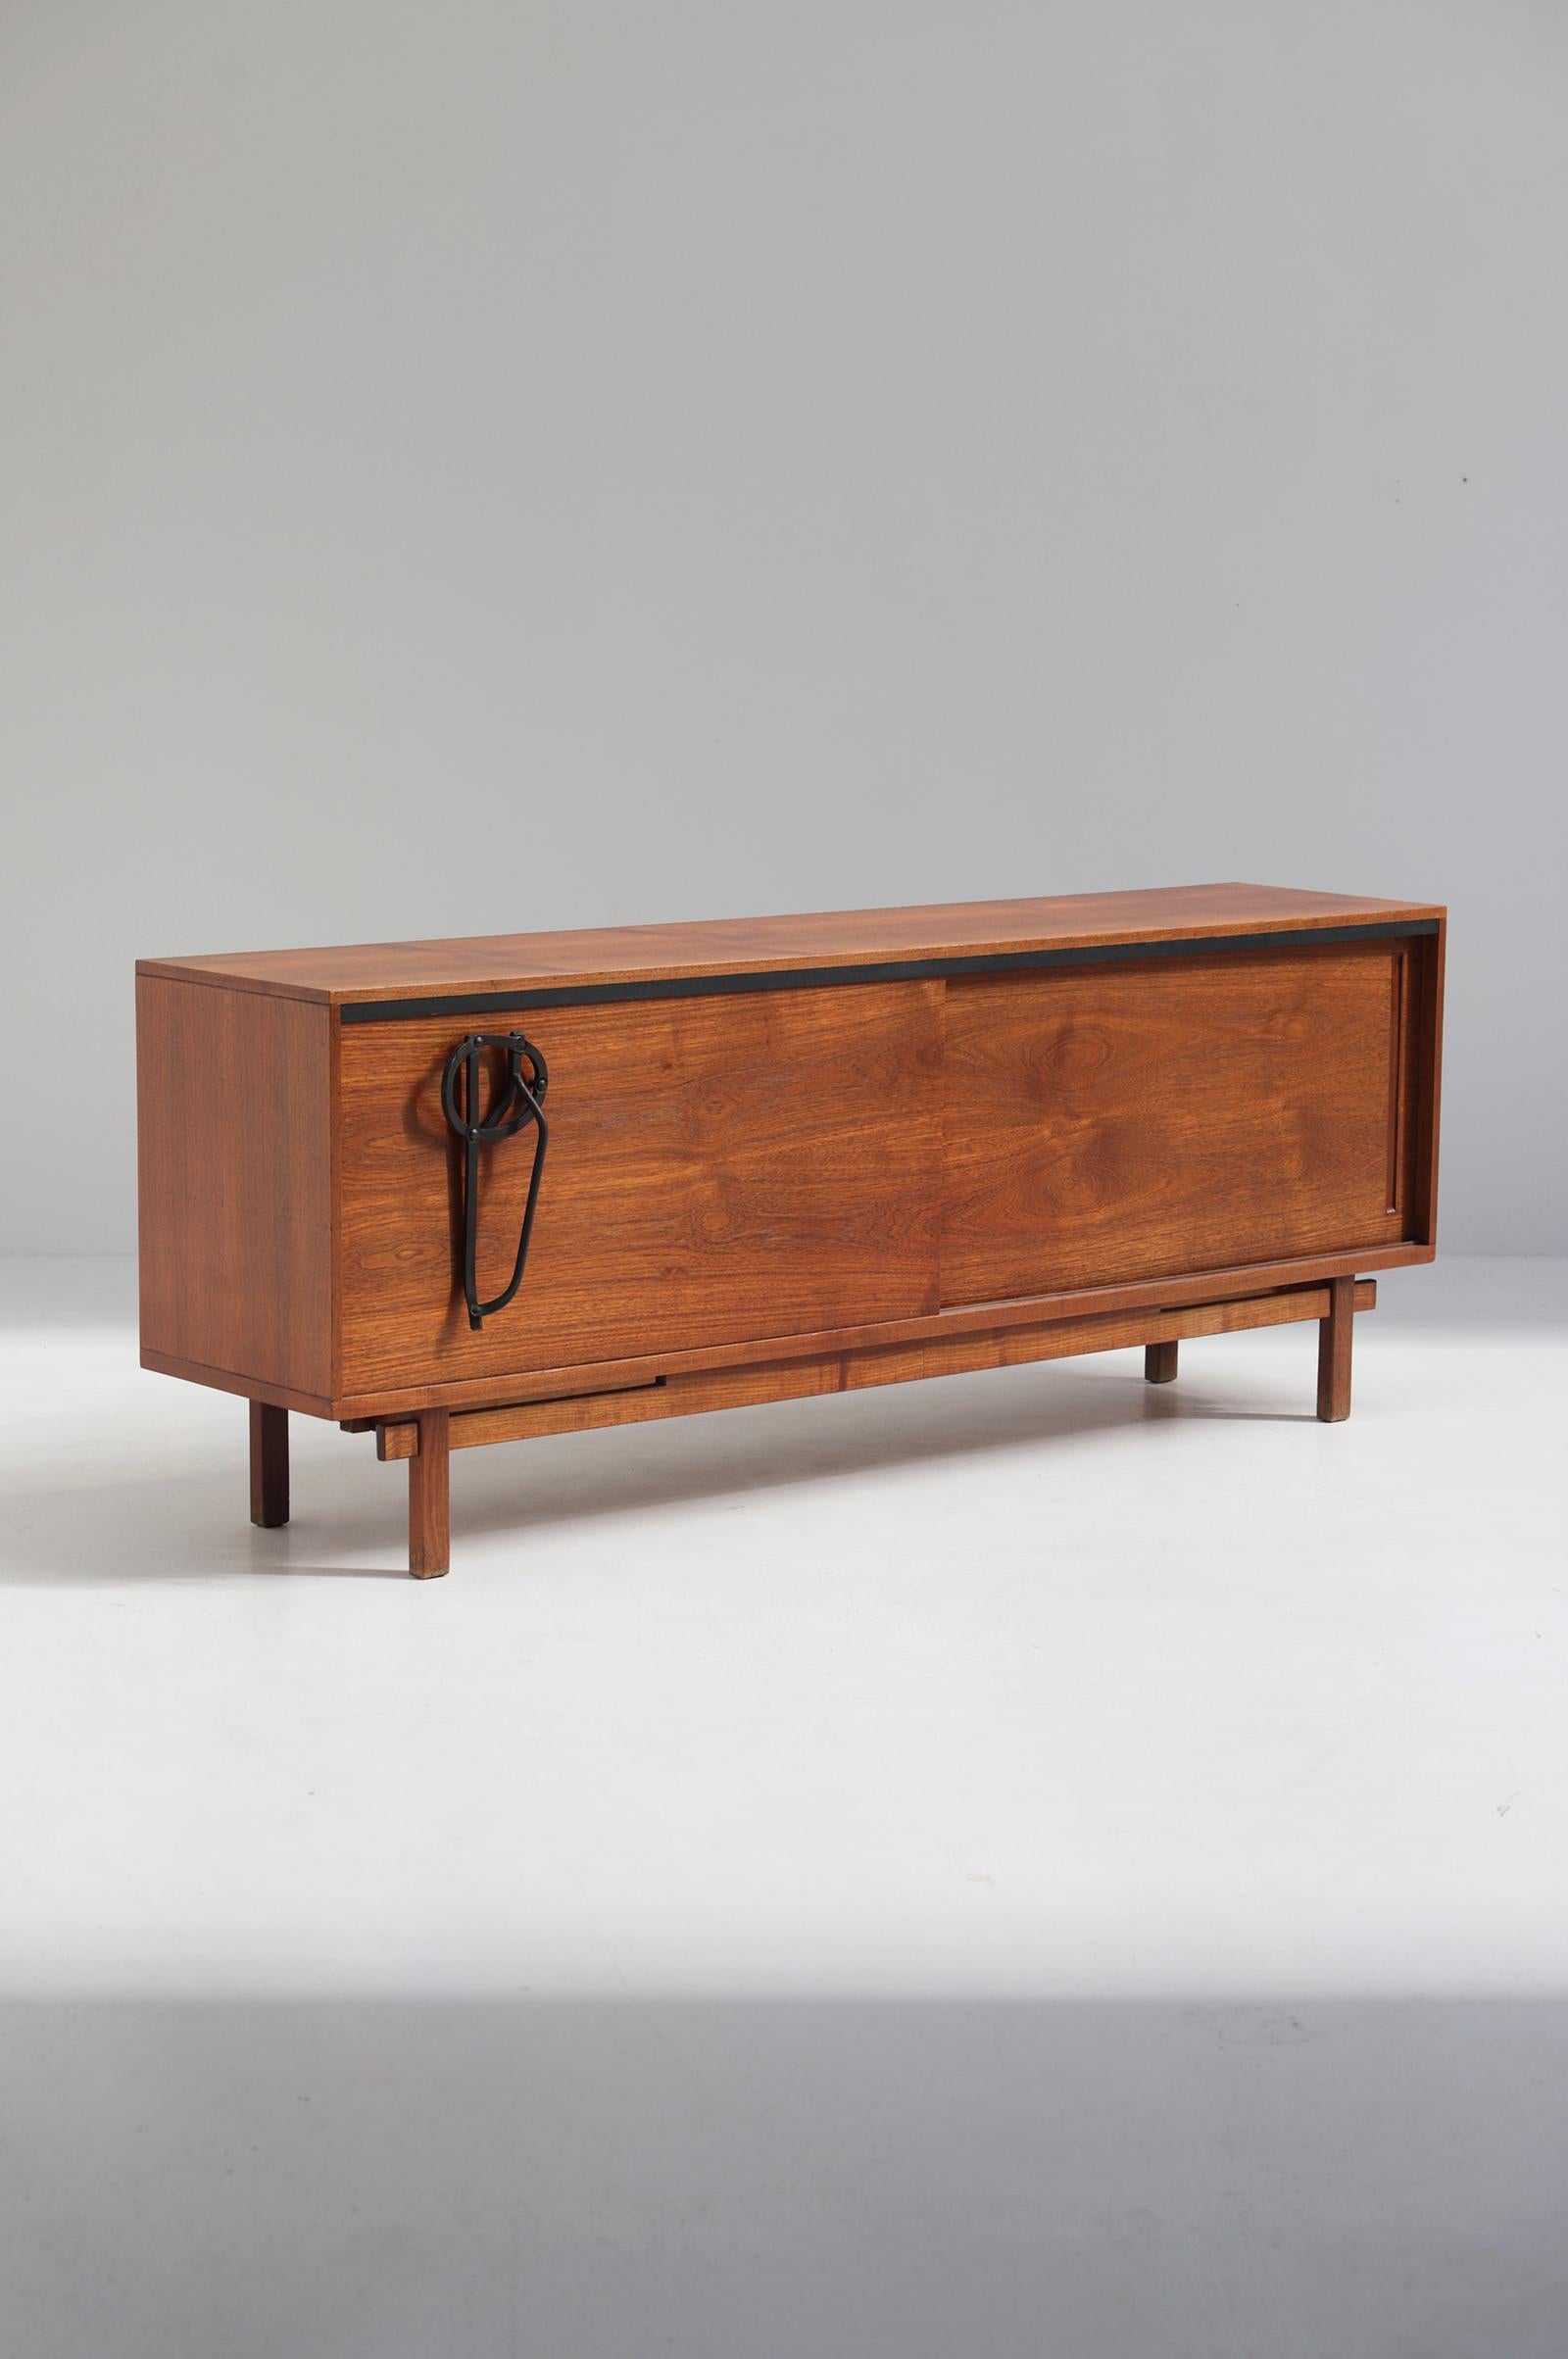 Mid-20th Century Midcentury wooden sideboard by J. Batenburg and E. Souply for MI Belgium 1960s.